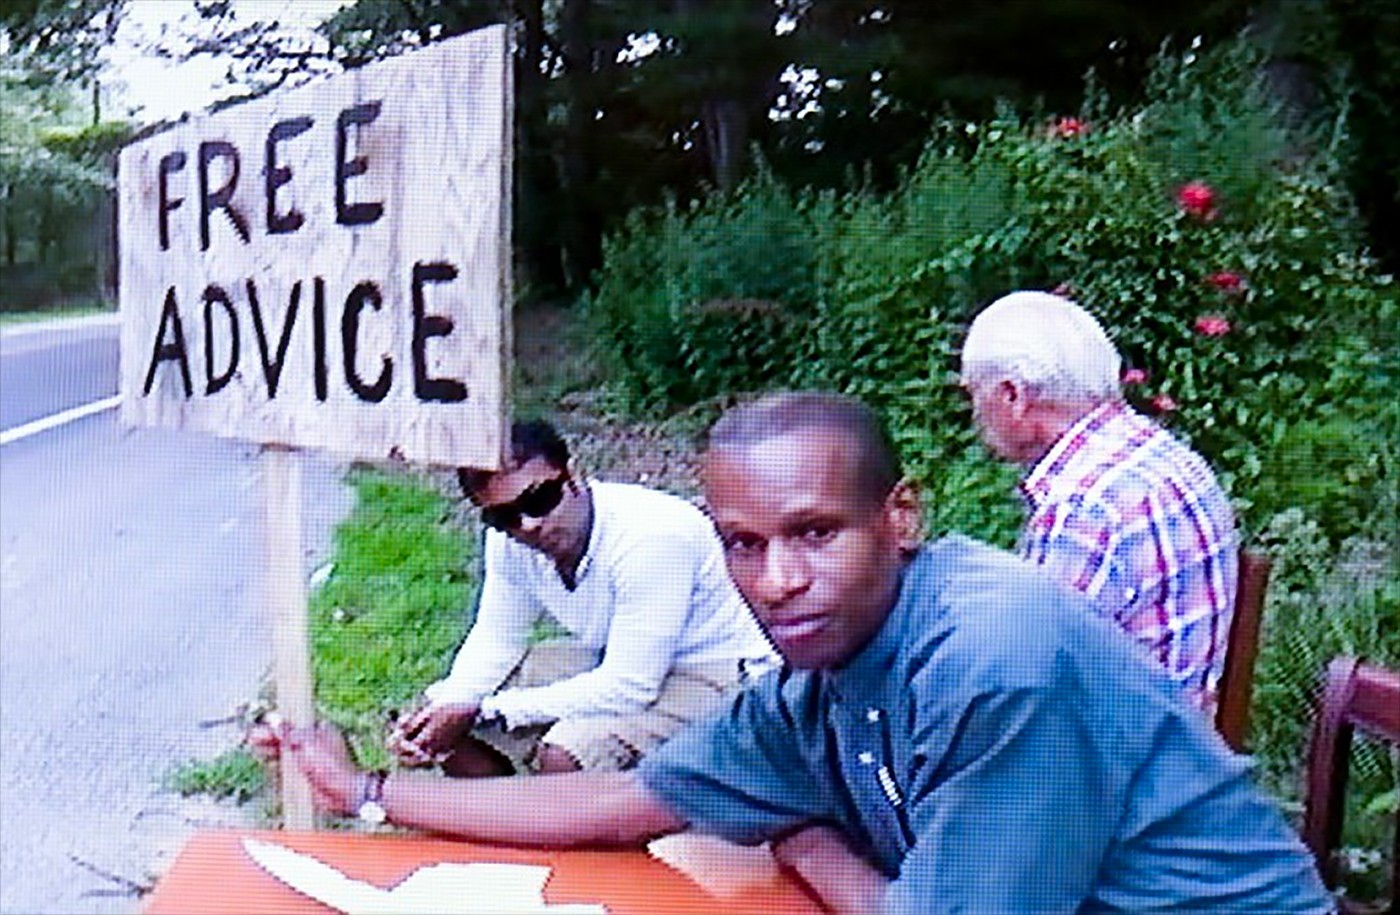 Three people sitting at a table on the side of a road, one person holding a 'Free Advice' sign